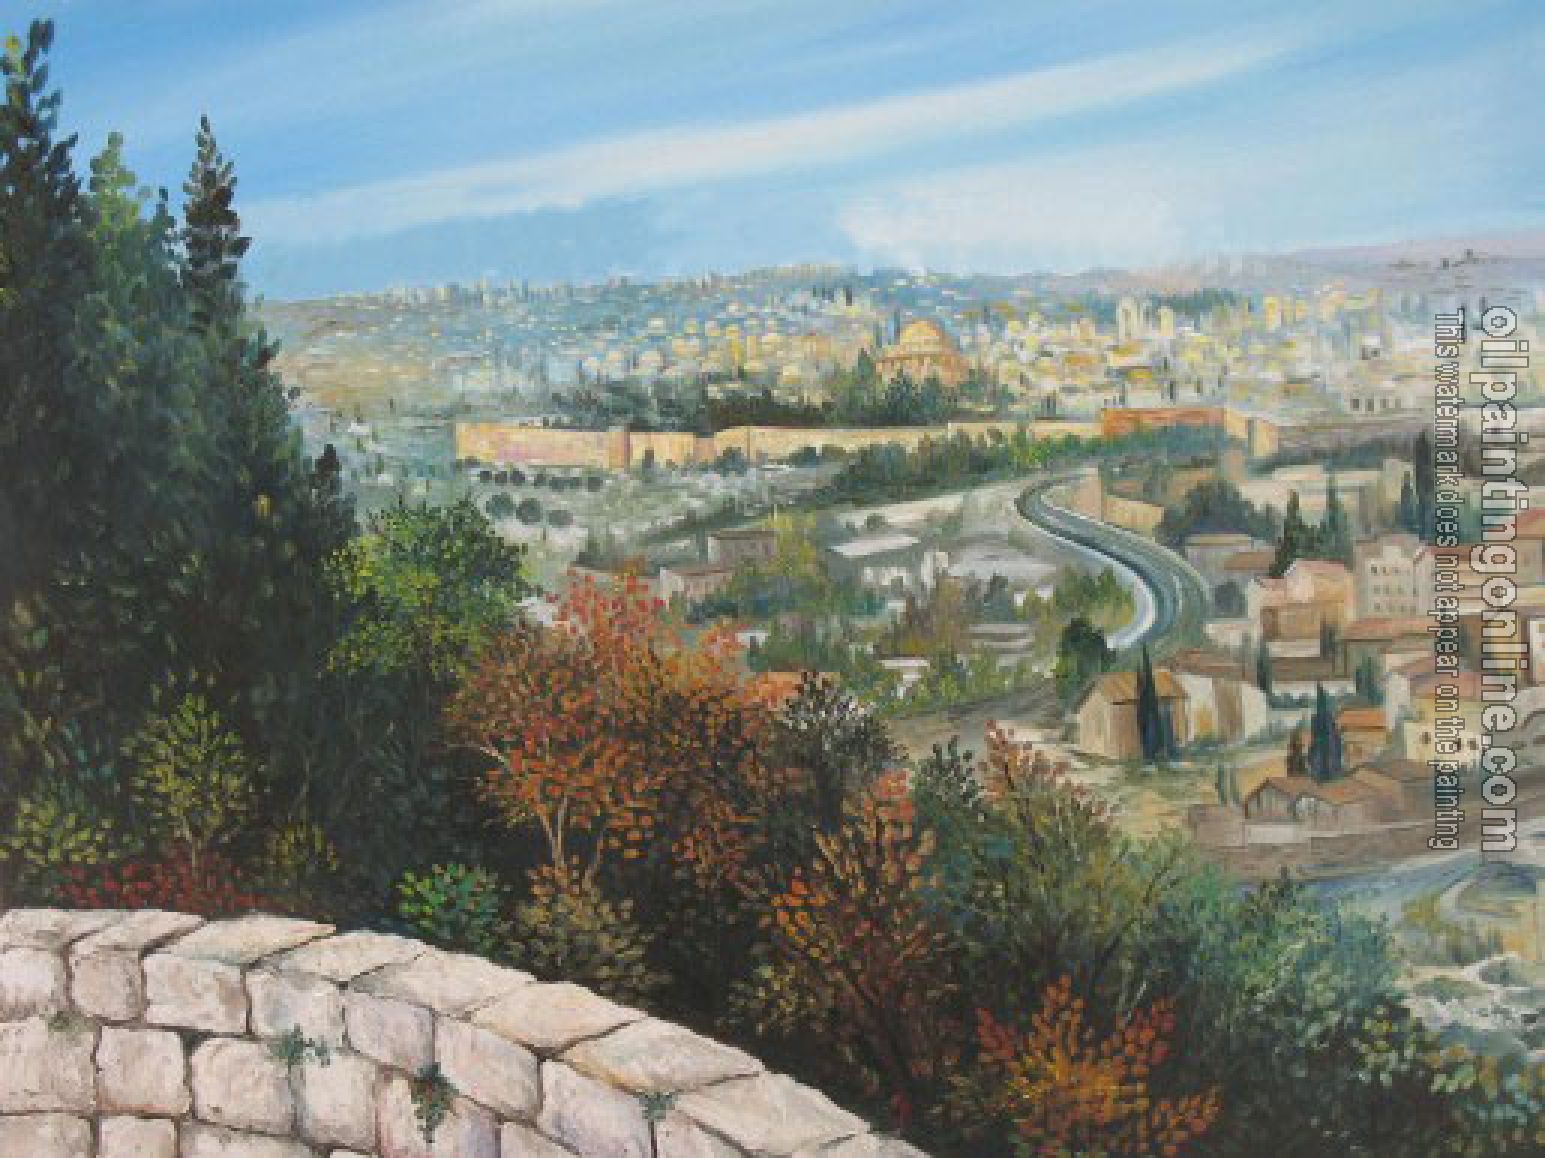 Oil Painting Reproduction - Jewish art